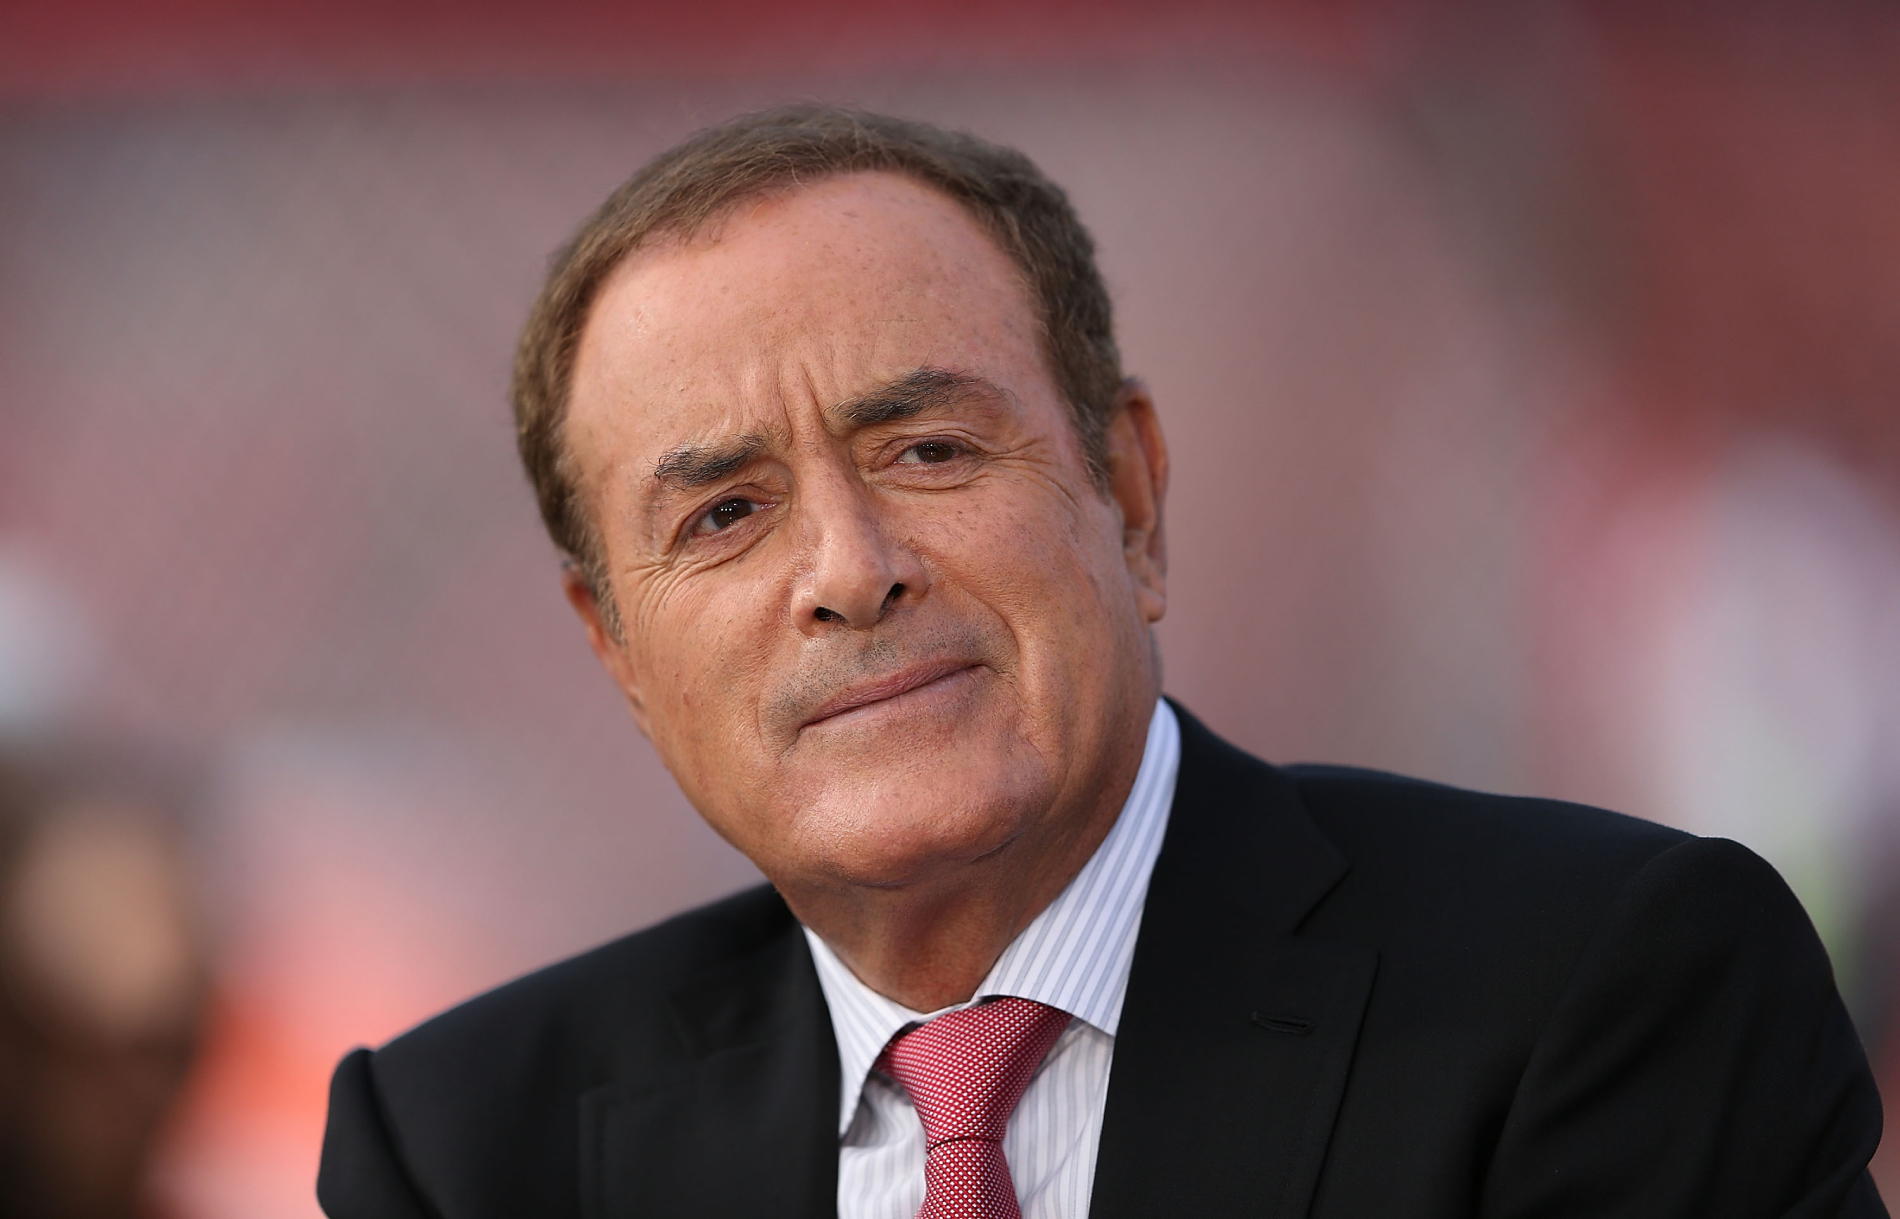 Al Michaels has covered many big sporting events. However, one year at the Super Bowl he had to be ready for terrorists to invade his booth.